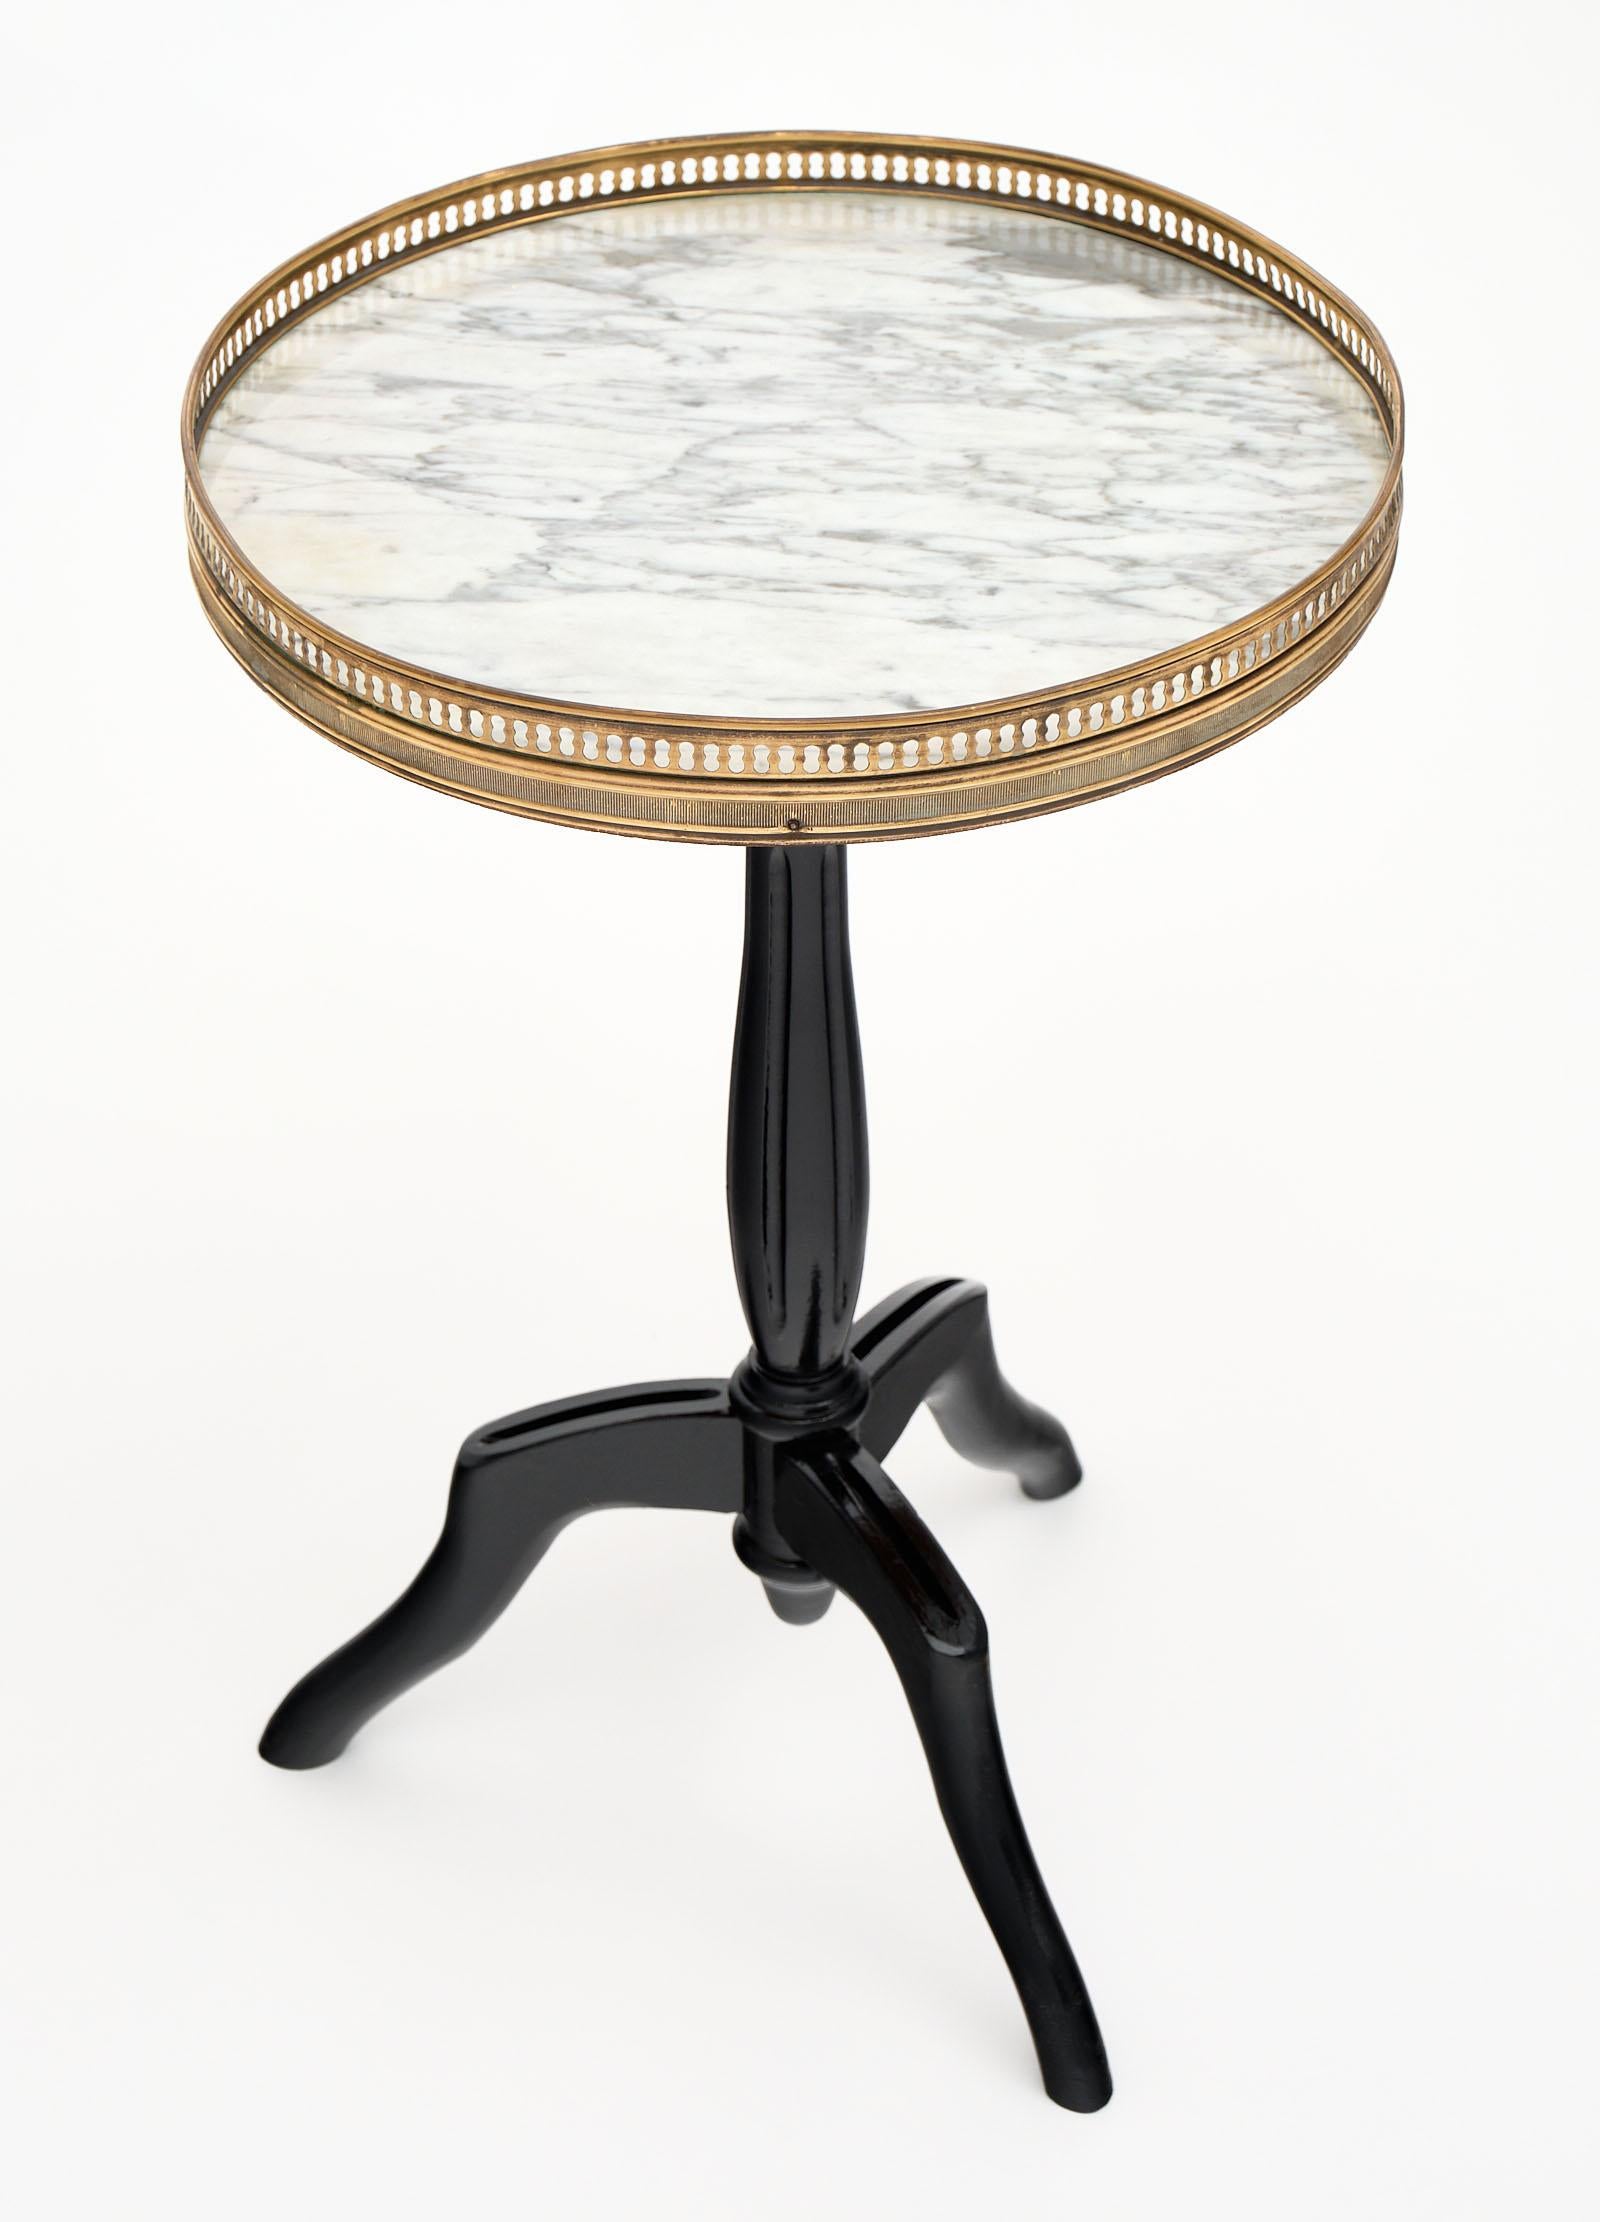 Louis XVI style petite side table with a mahogany base that has been ebonized and finished with a French polish. We love the fluted tulip center foot and tripod feet. The round top is original Carrara marble and is finished with a brass gallery. A